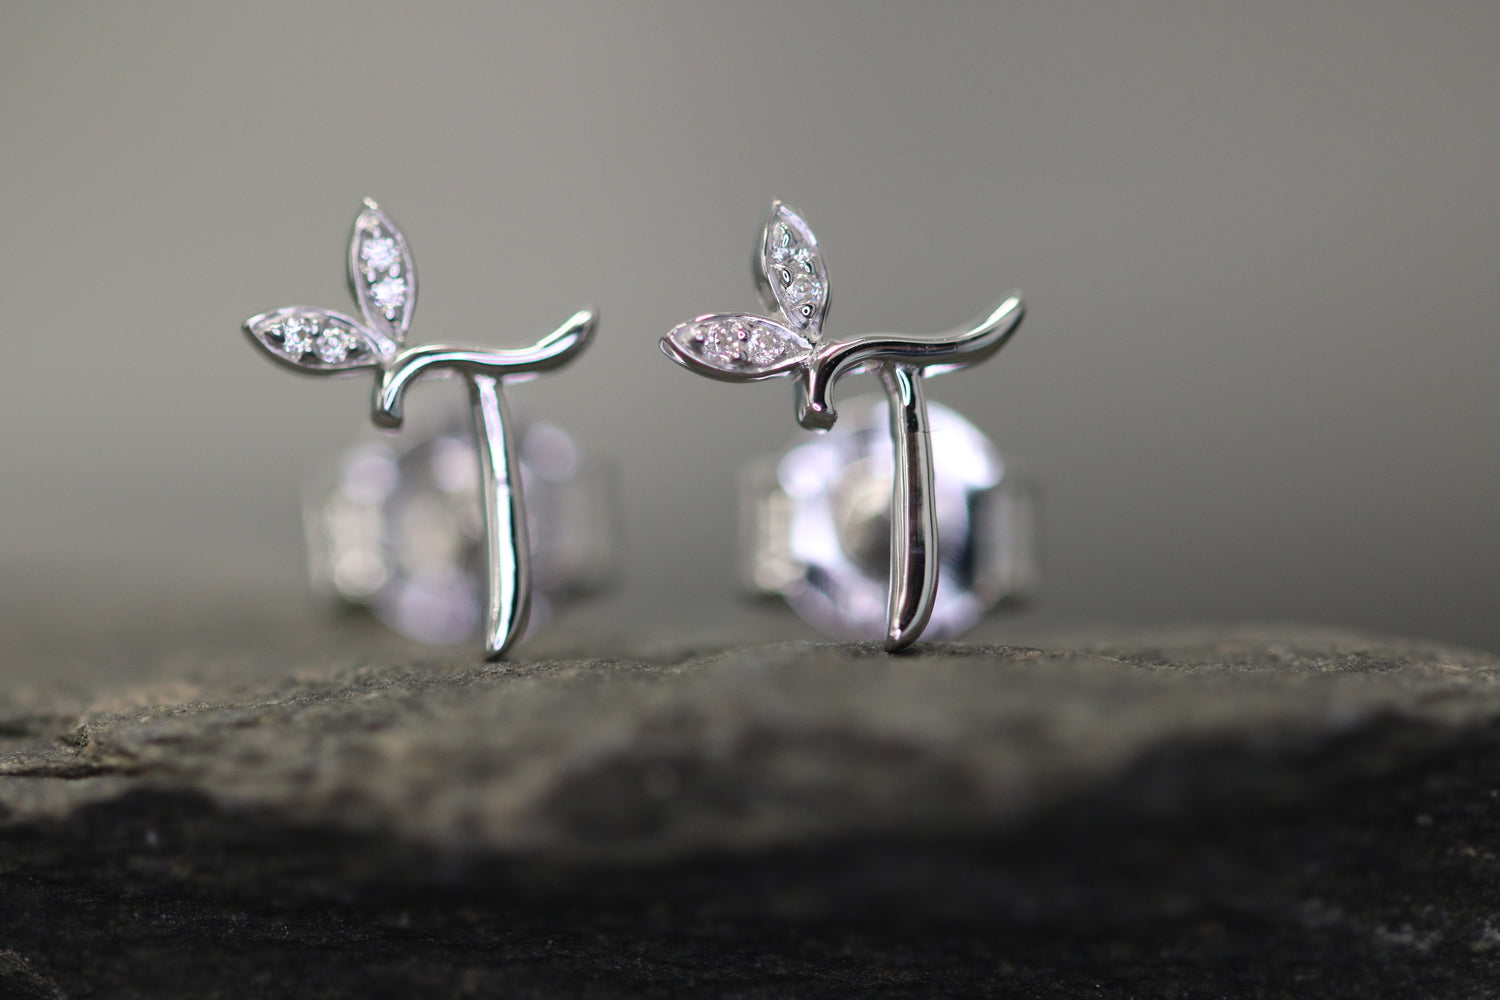 Silver Initial Earrings with CZ Detail - MJI004 - Hallmark Jewellers Formby & The Jewellers Bench Widnes